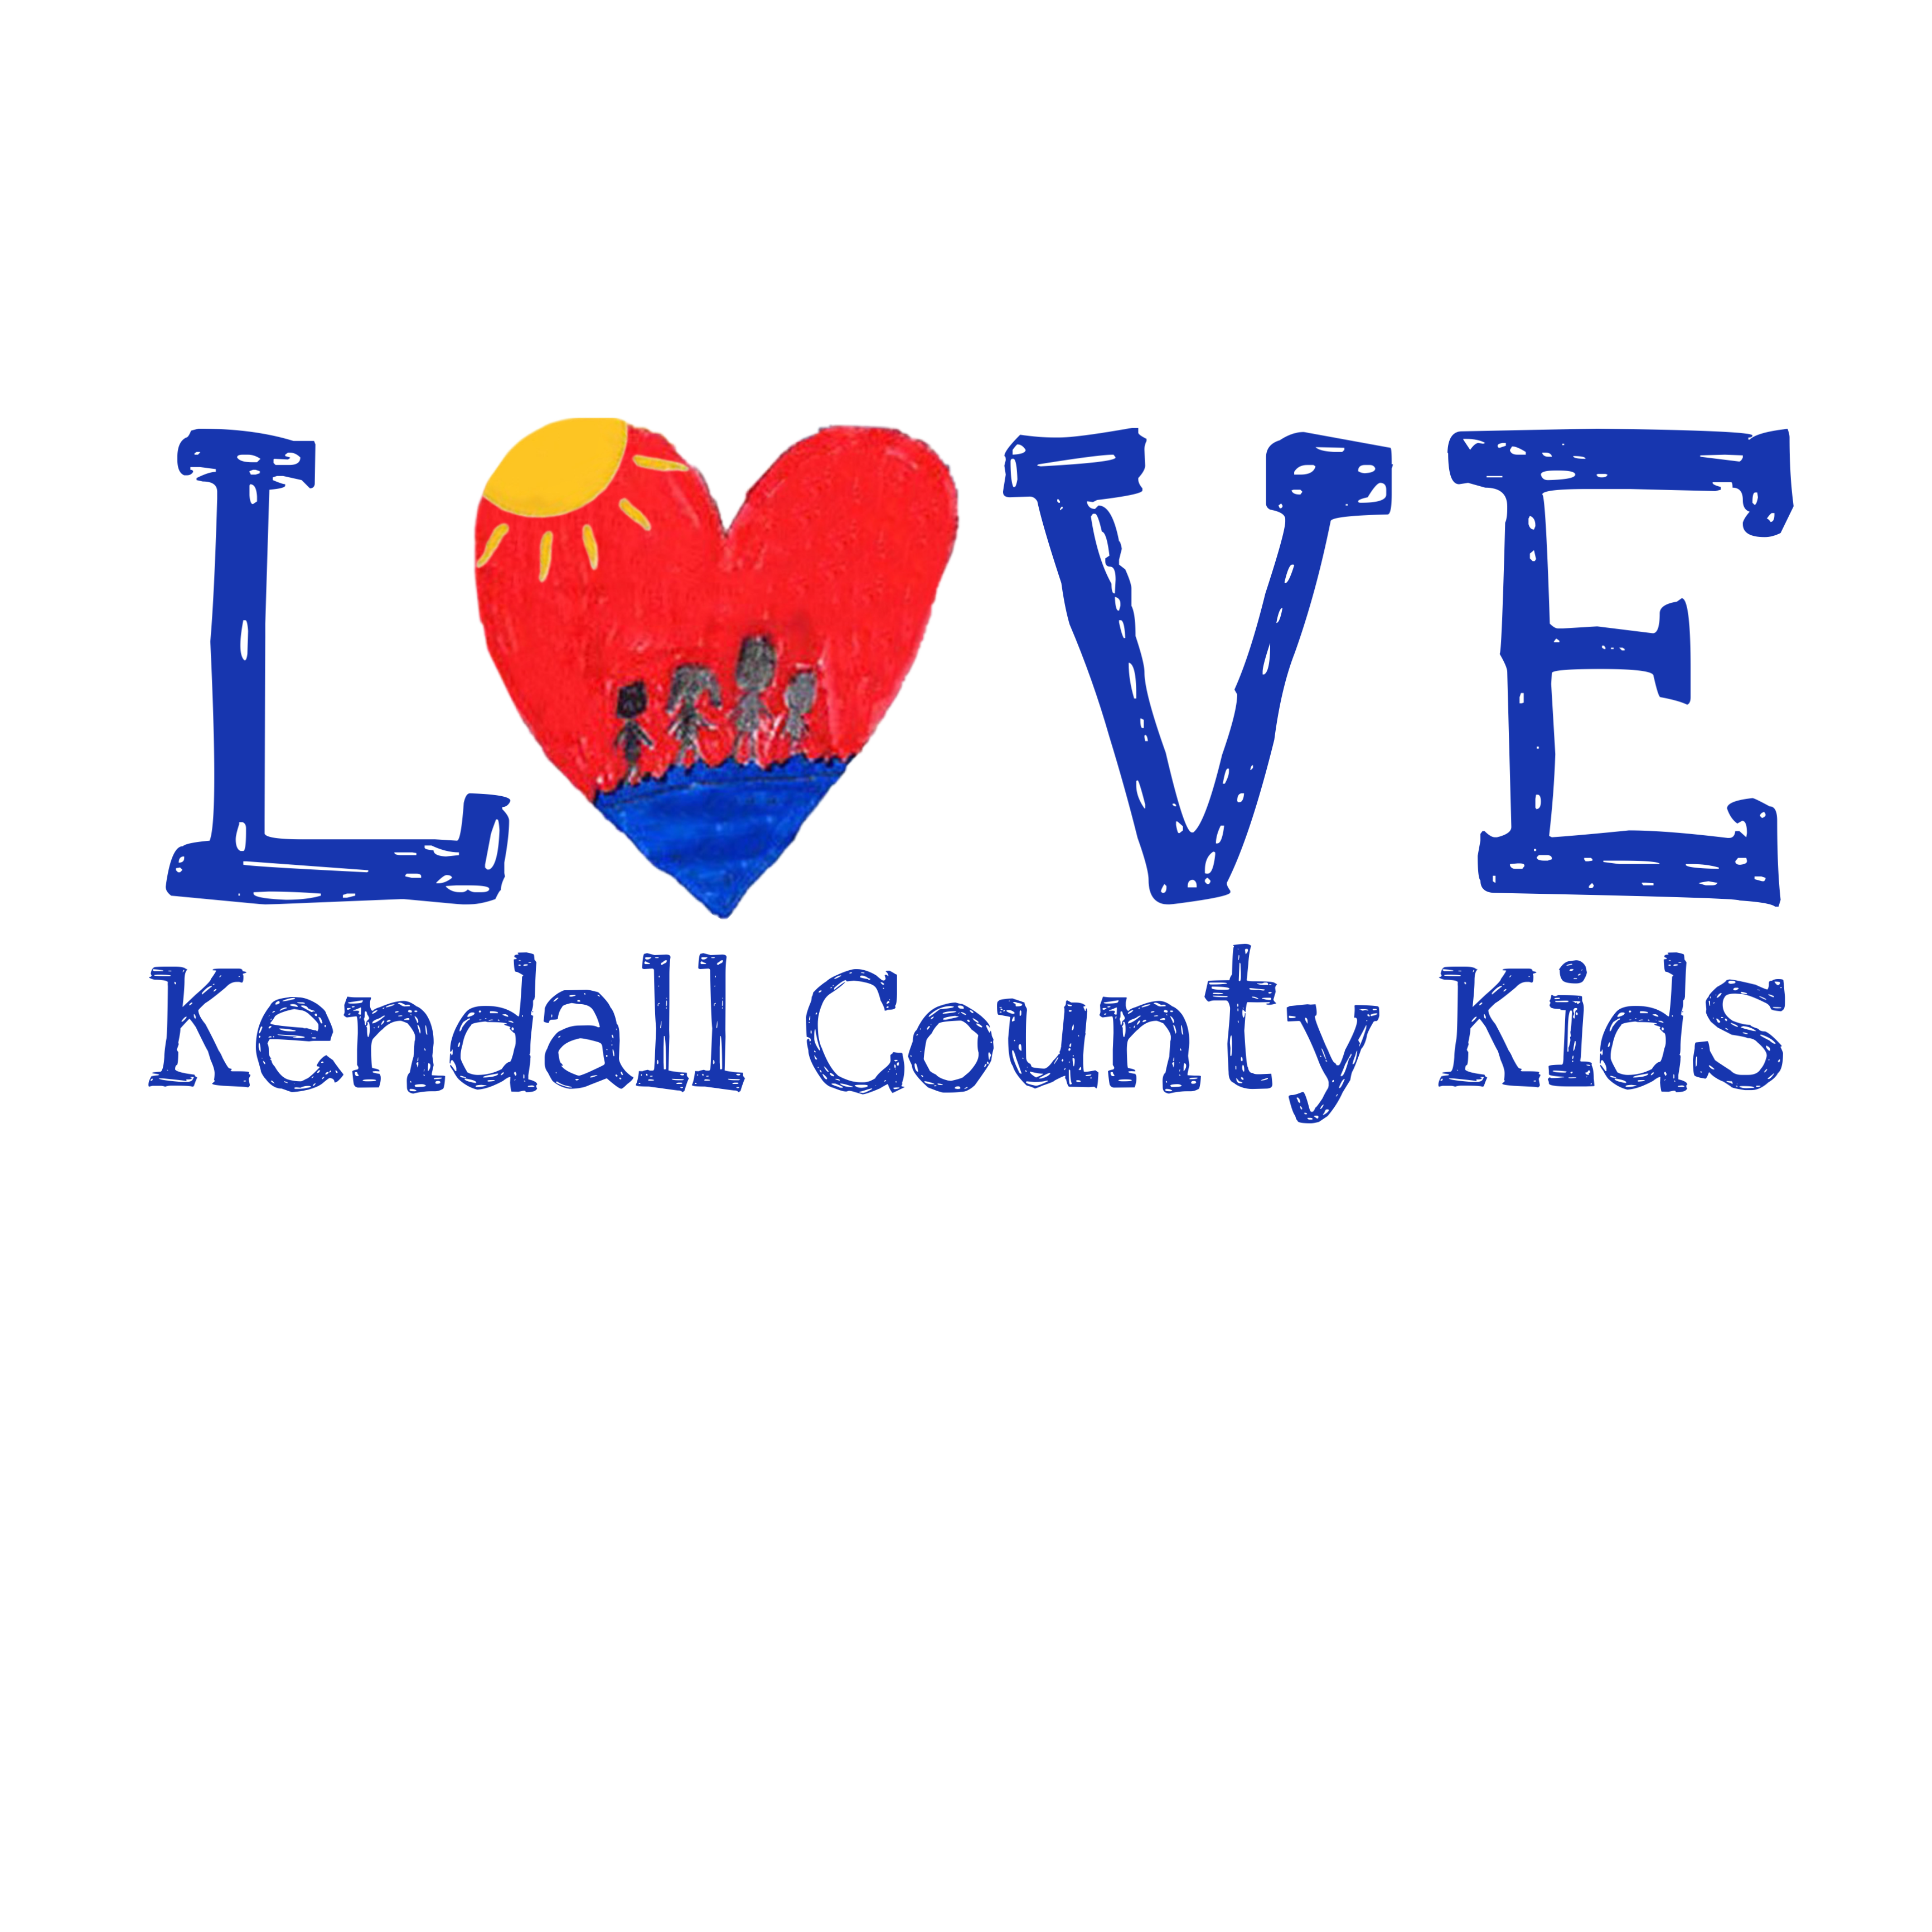 http://LOVE%20Kendall%20County%20Kids